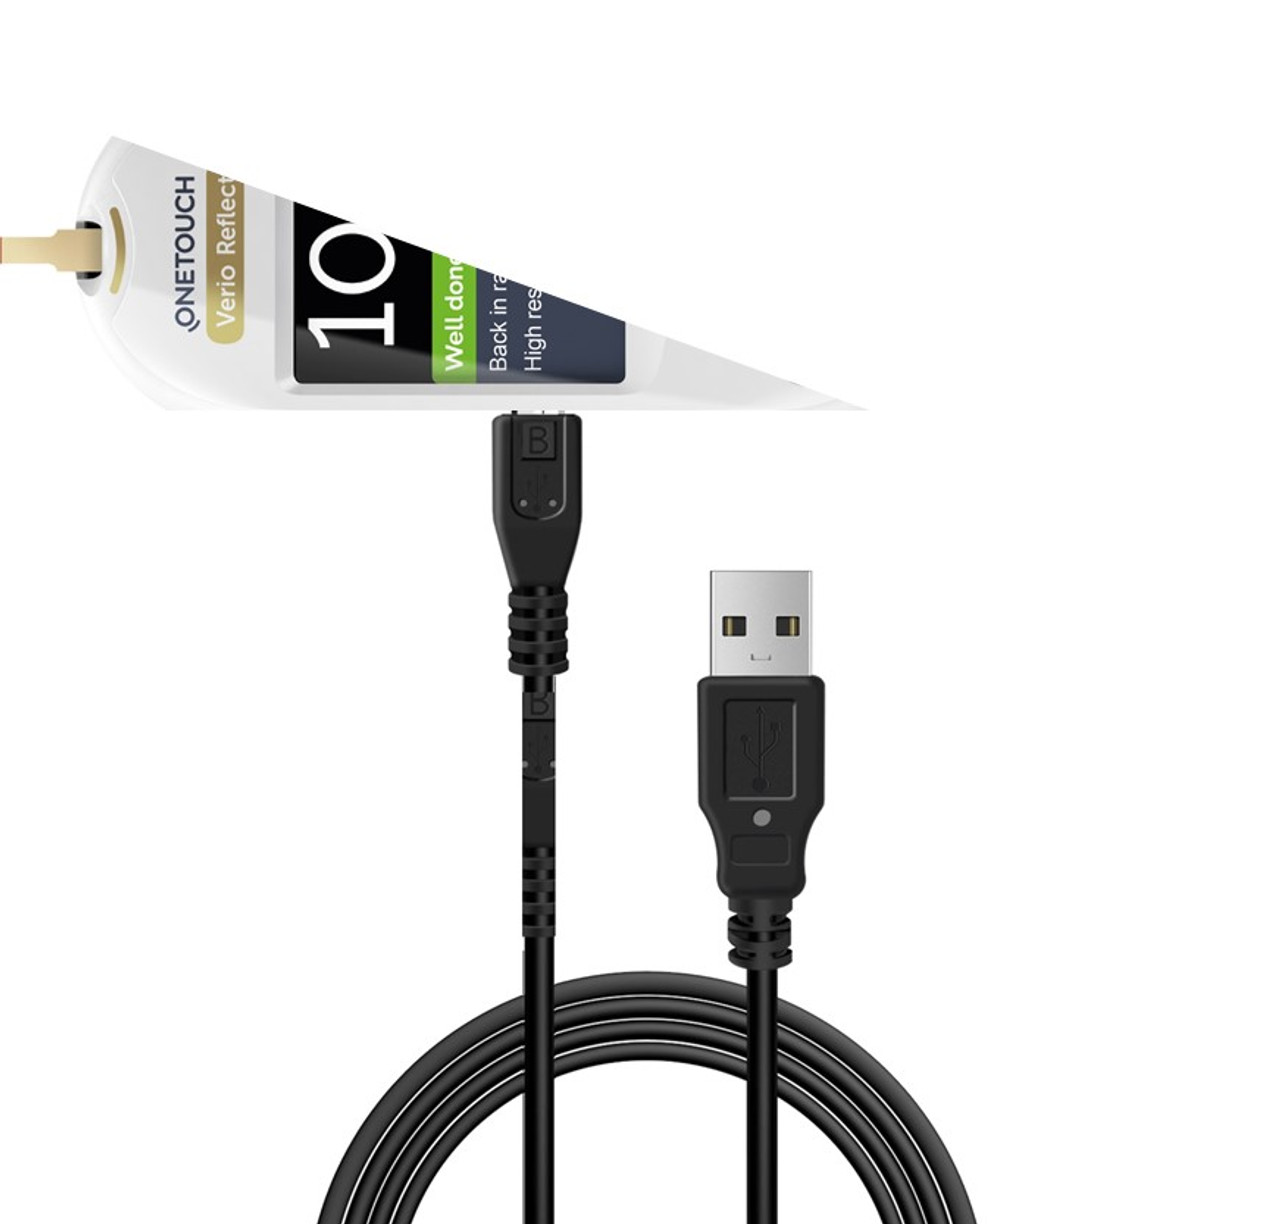 als Omleiding hun OneTouch Verio Reflect Meter USB Cable Only Micro USB